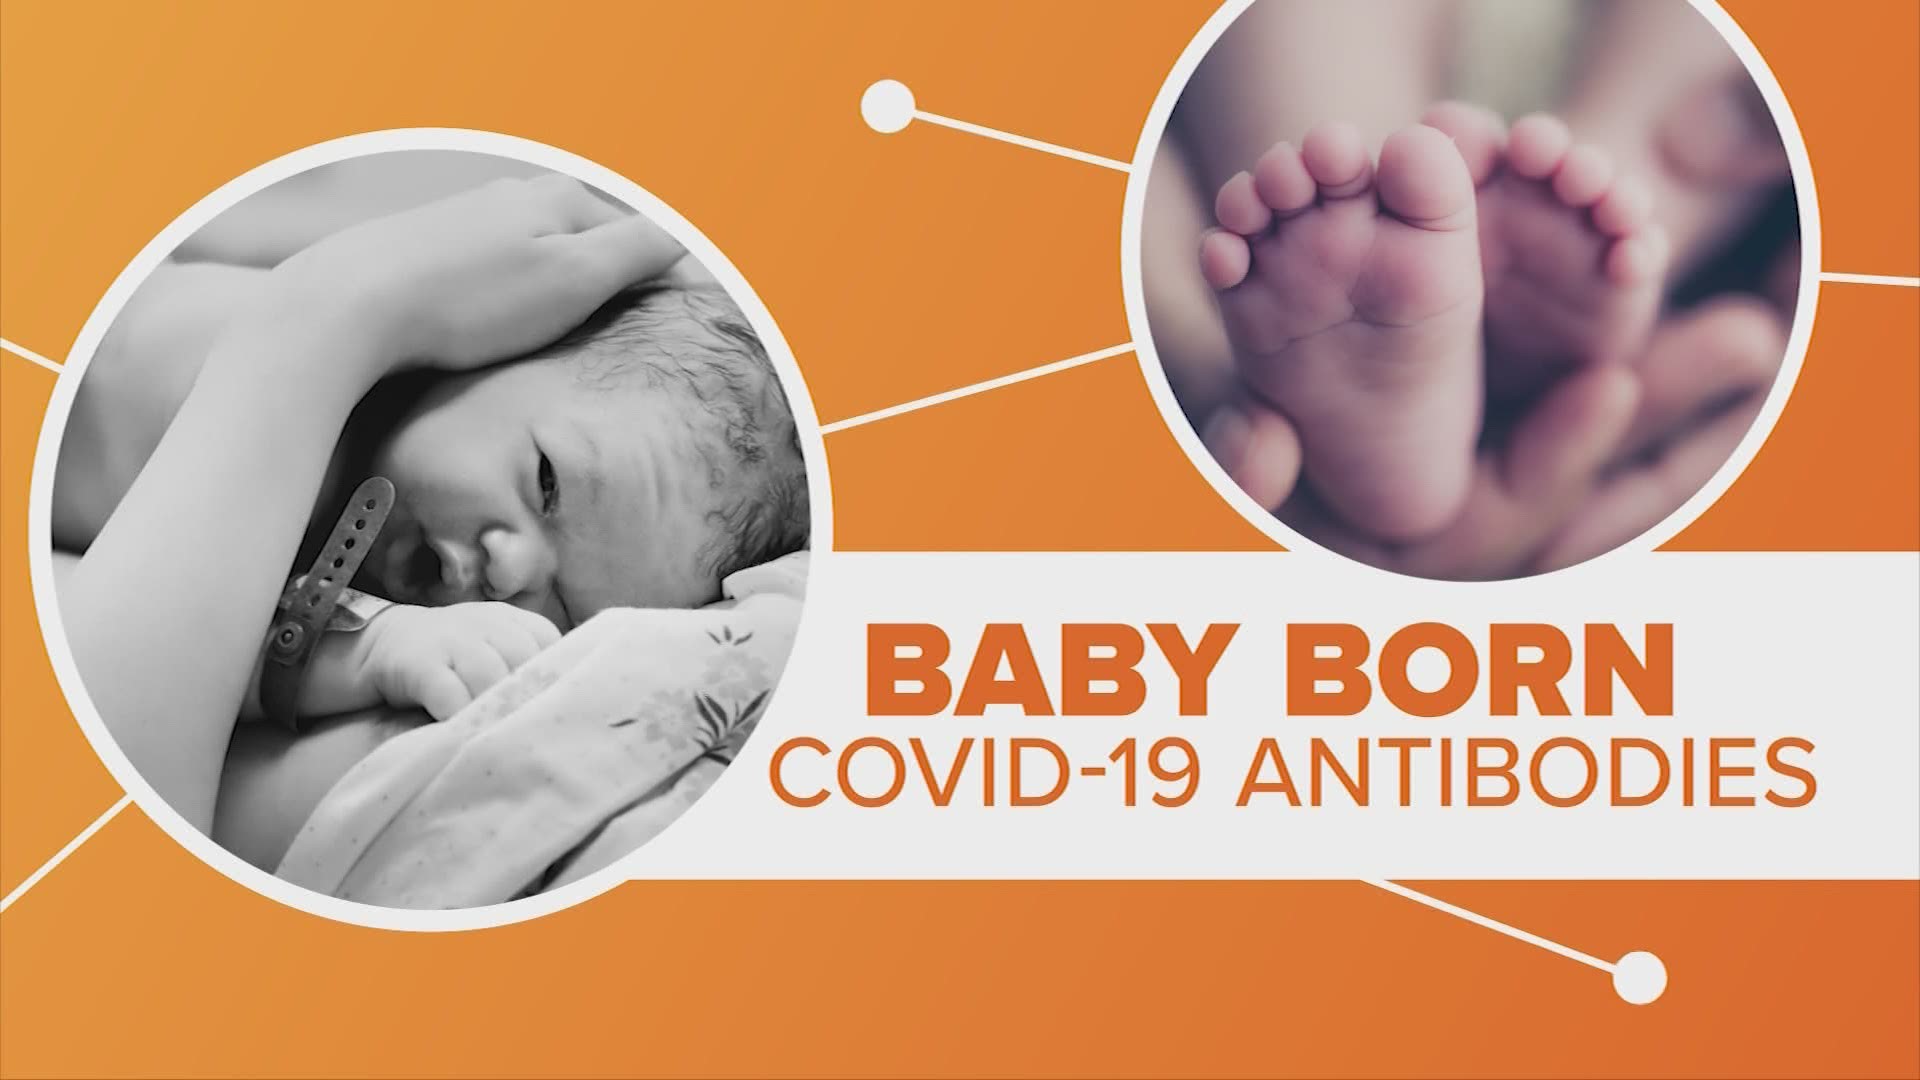 Doctors report a baby girl in Florida was born with the antibodies to fight COVID-19 thanks to her mom. Let’s connect the dots.